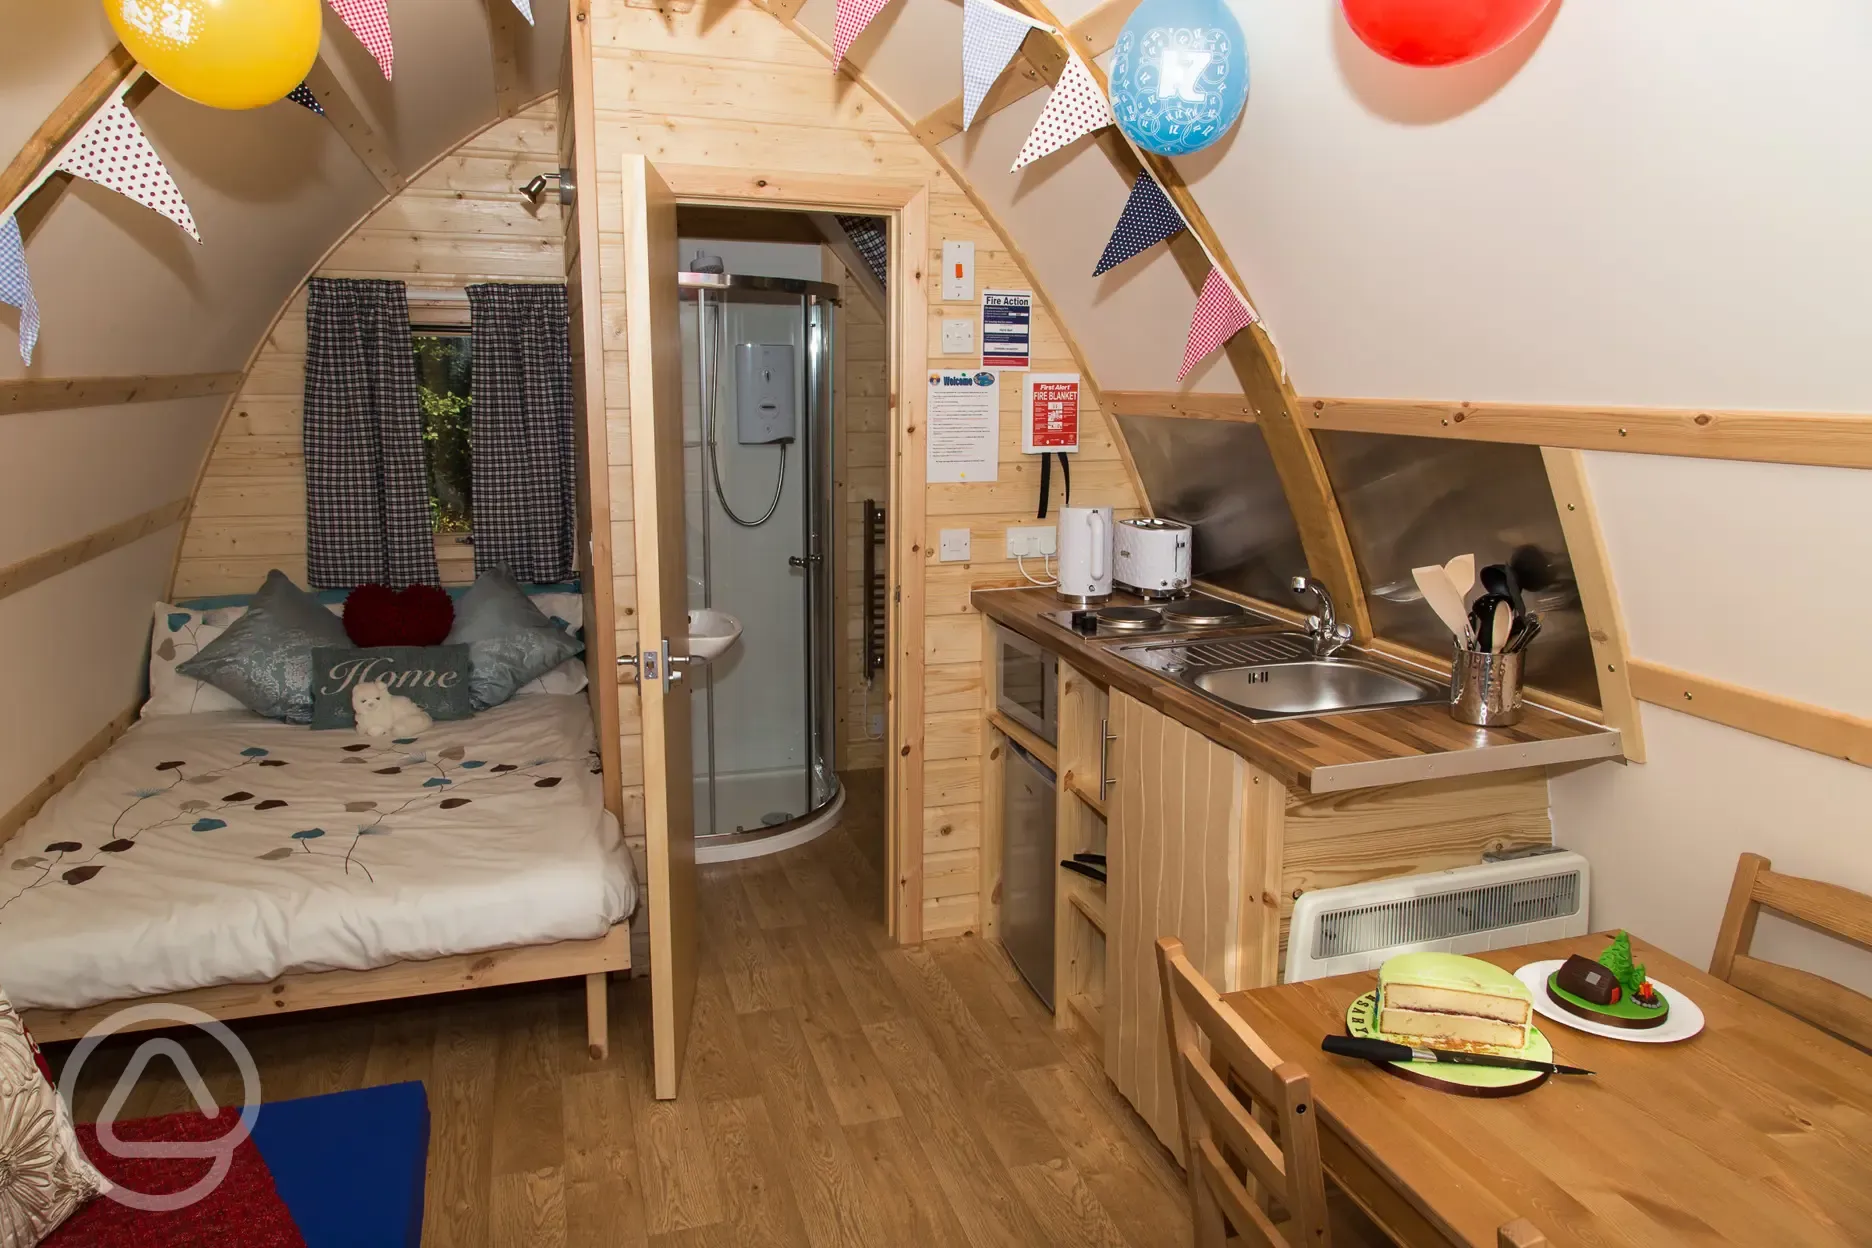 party time in the en-suite wigwam